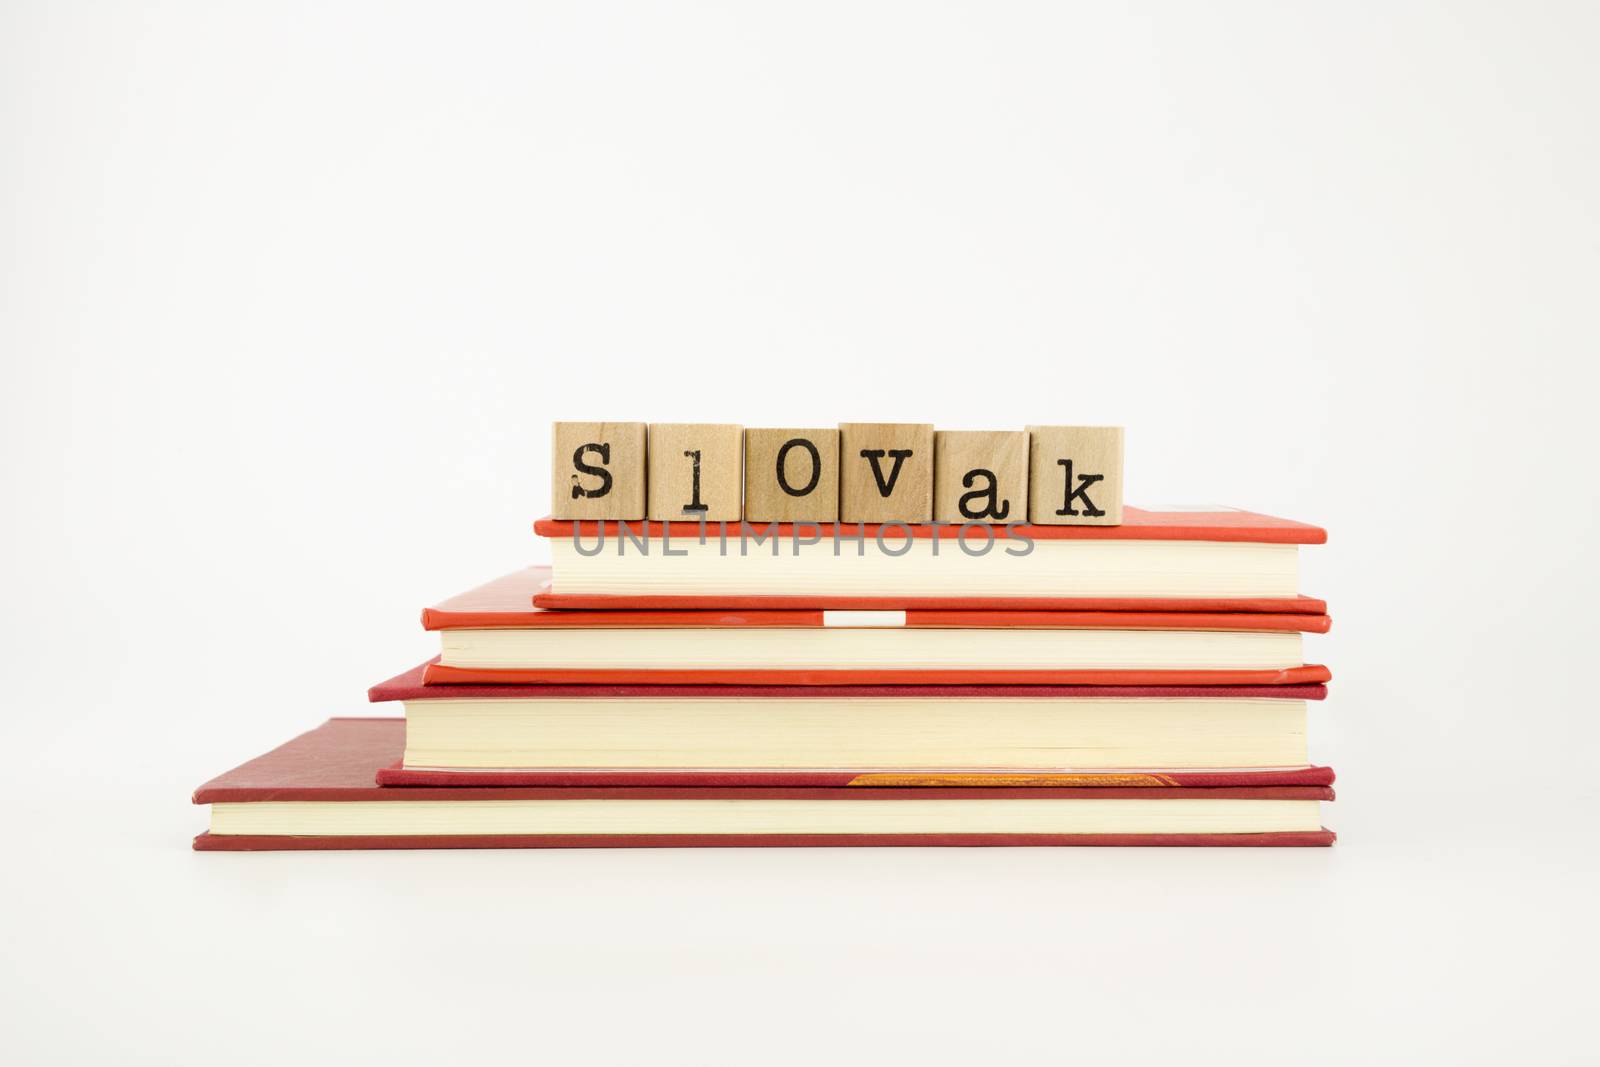 slovak word on wood stamps stack on books, language and academic concept